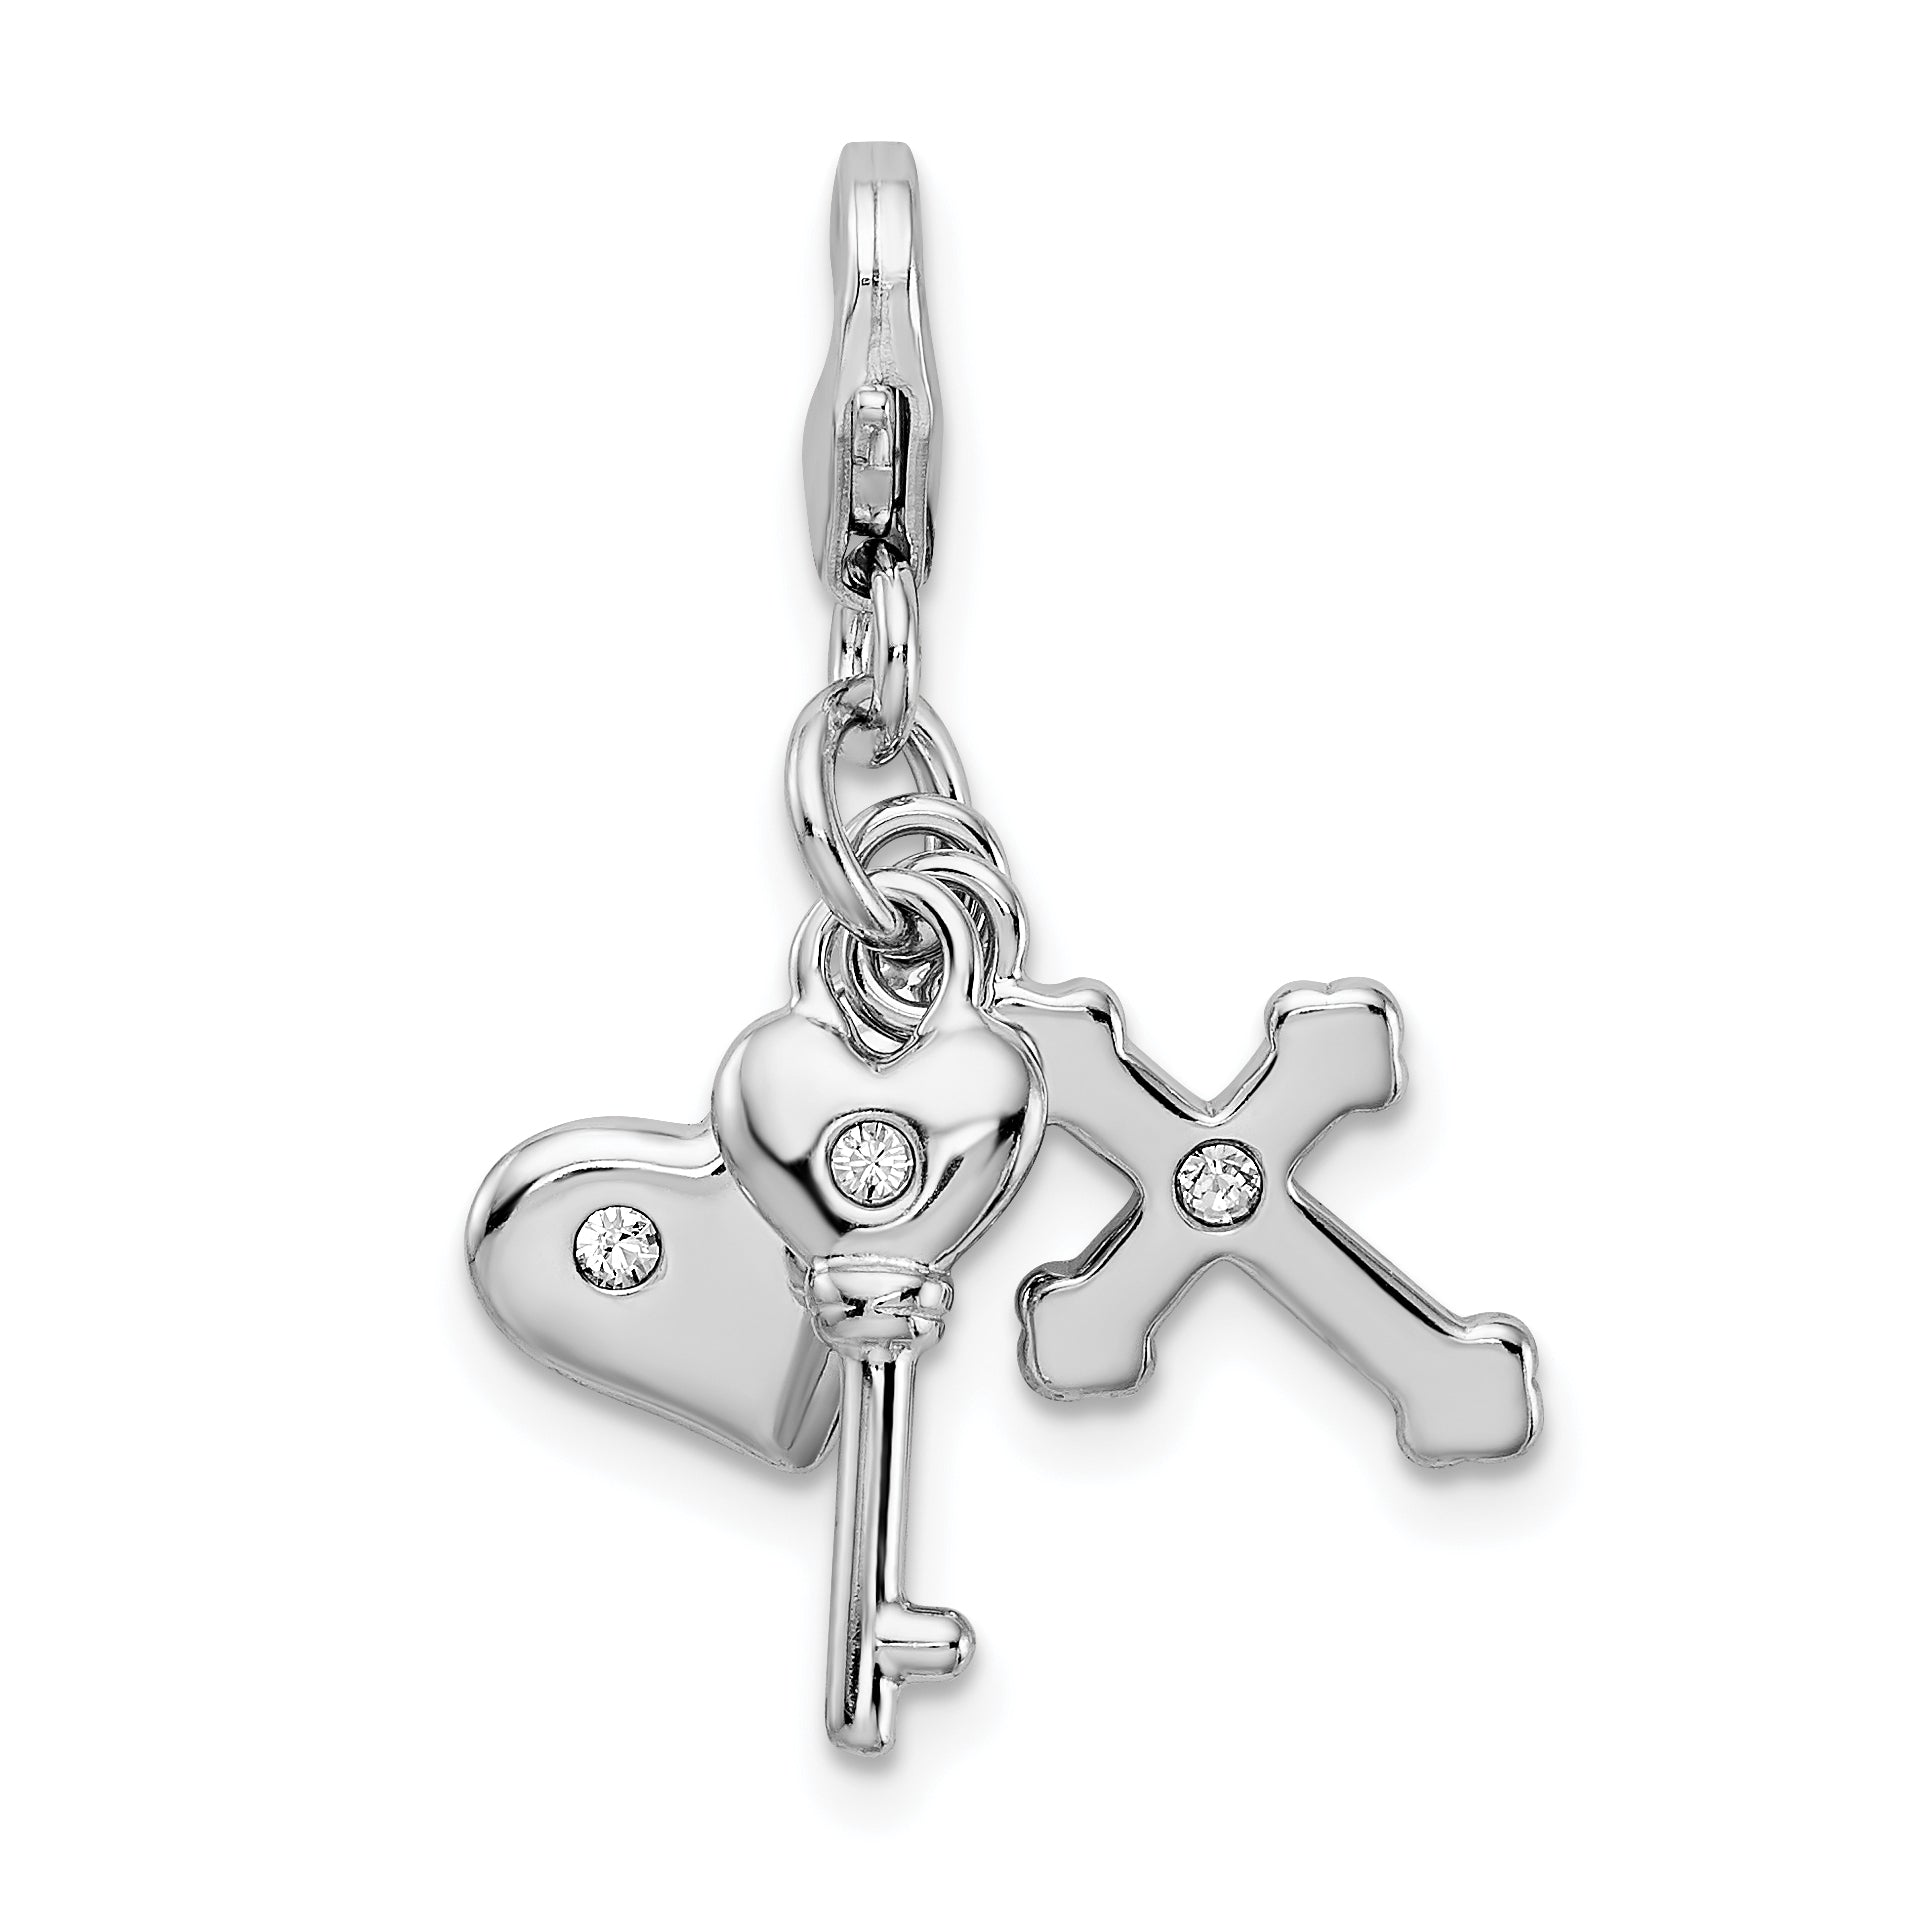 Amore La Vita Sterling Silver Rhodium-plated Polished Heart Cross and Key with Crystal From Swarovski Charm with Fancy Lobster Clasp